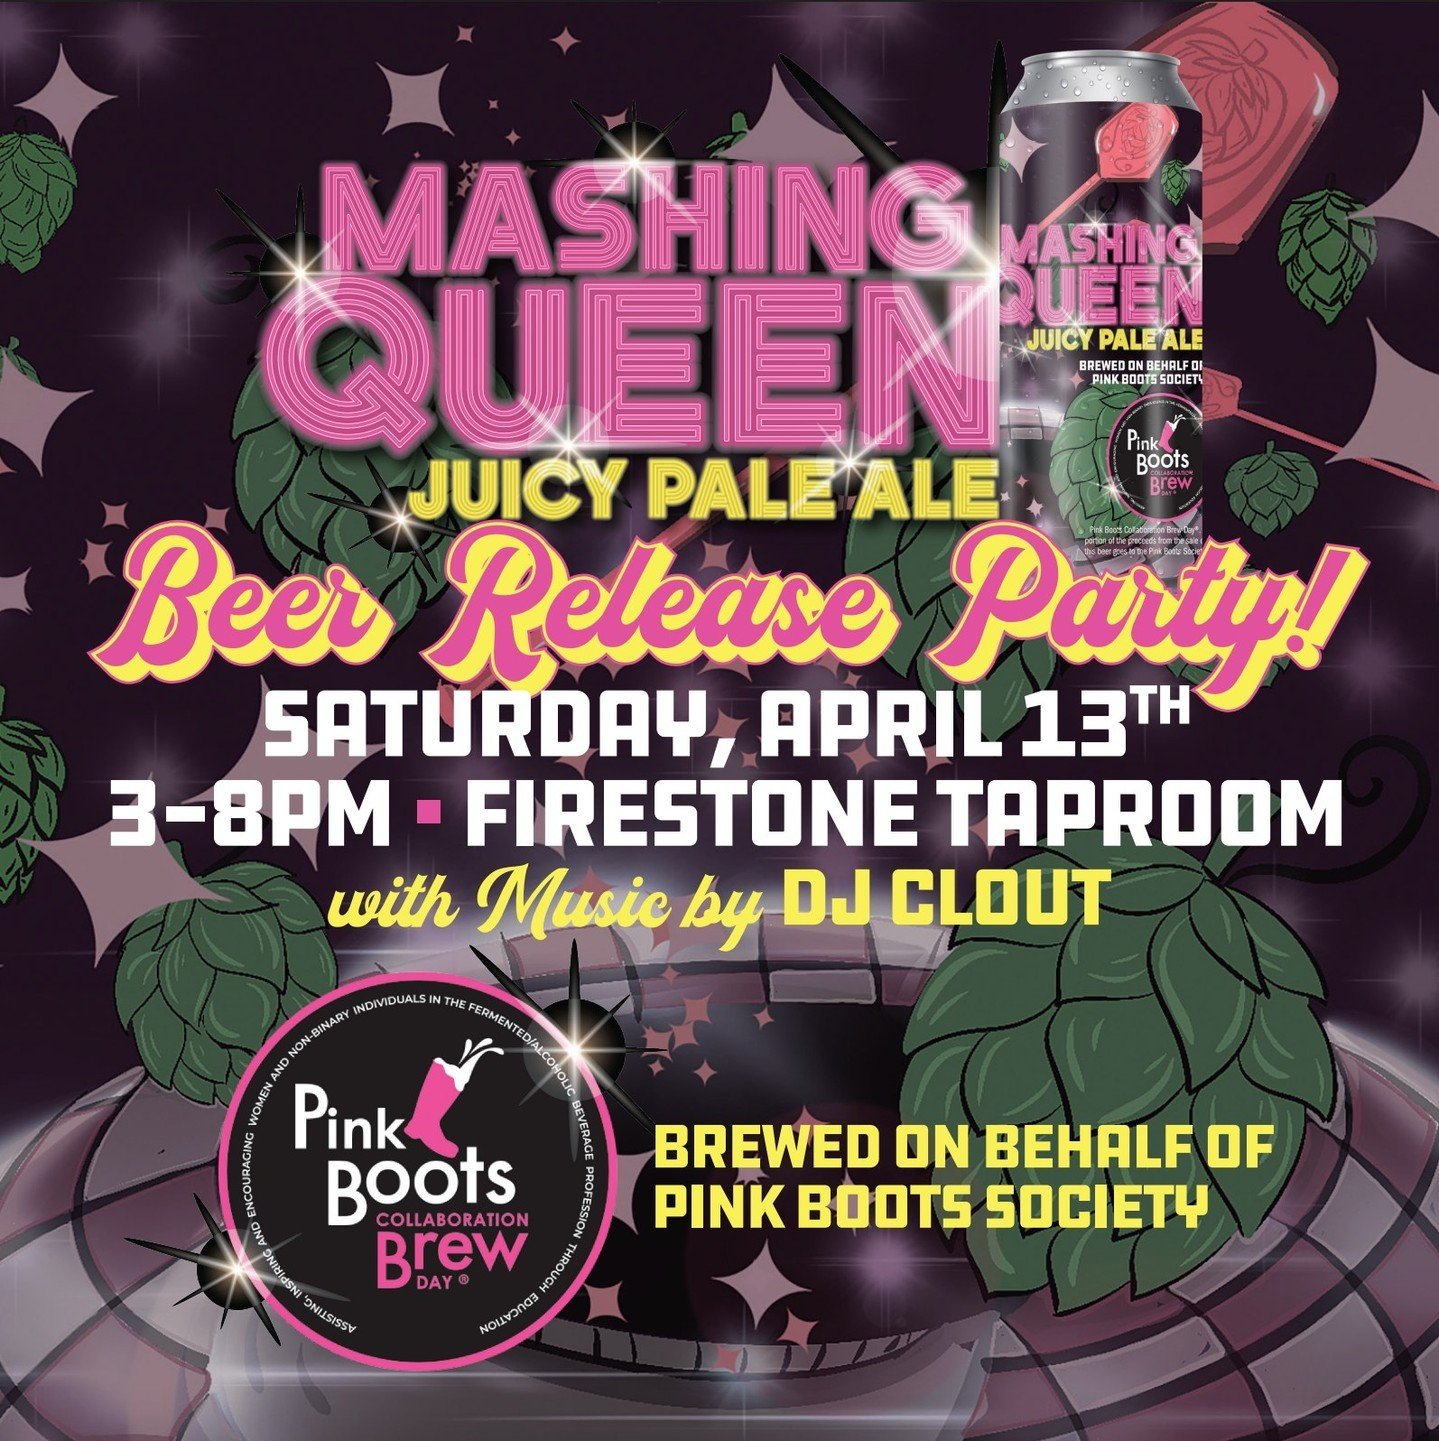 On tap and in cans Saturday: MASHING QUEEN Pale Ale!⁠
⁠
The #newmexico chapter of #pinkbootssociety presents our 9th Annual #collaBEERation beer, Mashing Queen, brewed on International Women&rsquo;s Day at and by Boxing Brewing Company. ⁠
Slightly sw